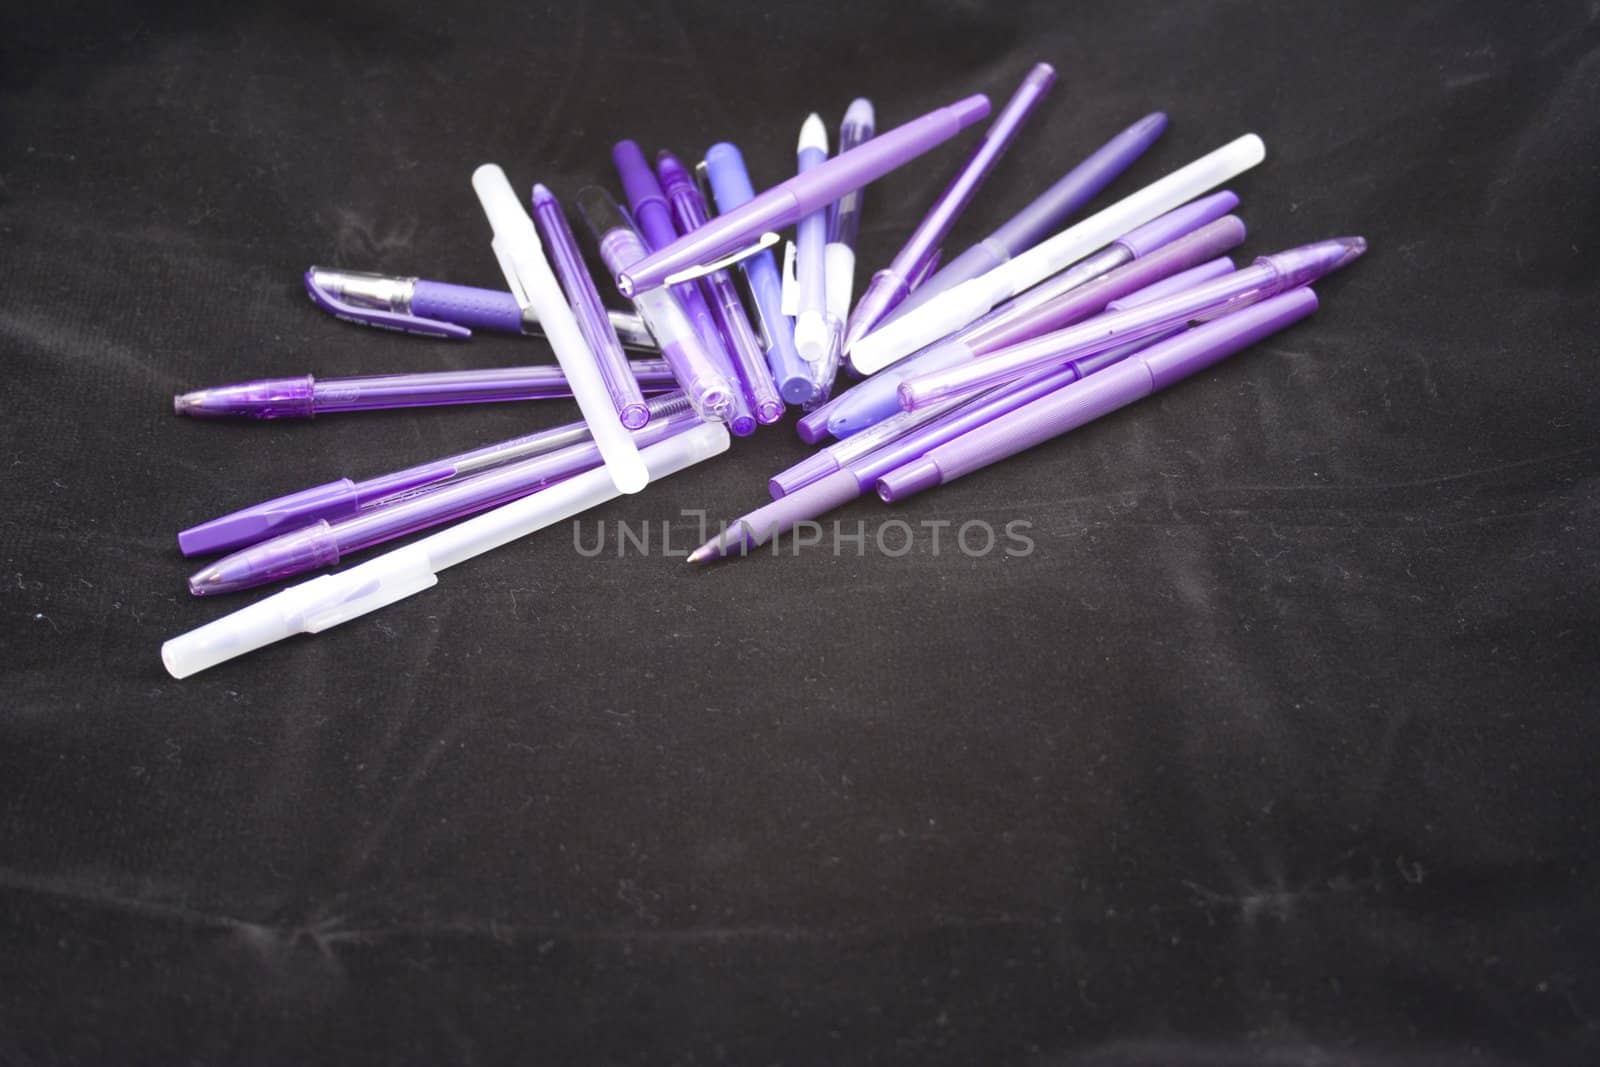 Pile of purple pens just waiting for someone to pick one up and start writing